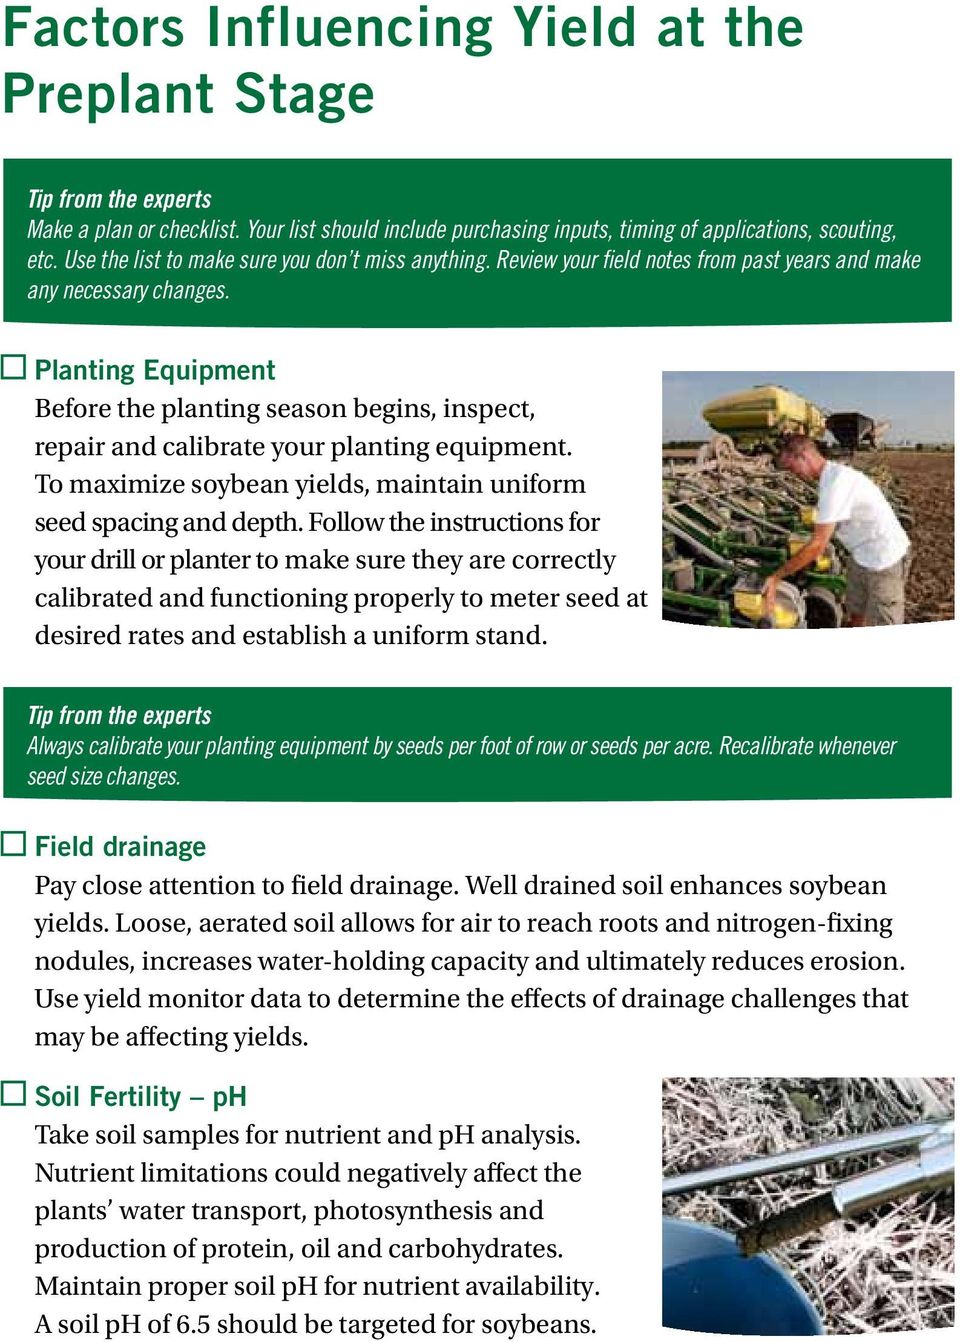 Planting Equipment Before the planting season begins, inspect, repair and calibrate your planting equipment. To maximize soybean yields, maintain uniform seed spacing and depth.